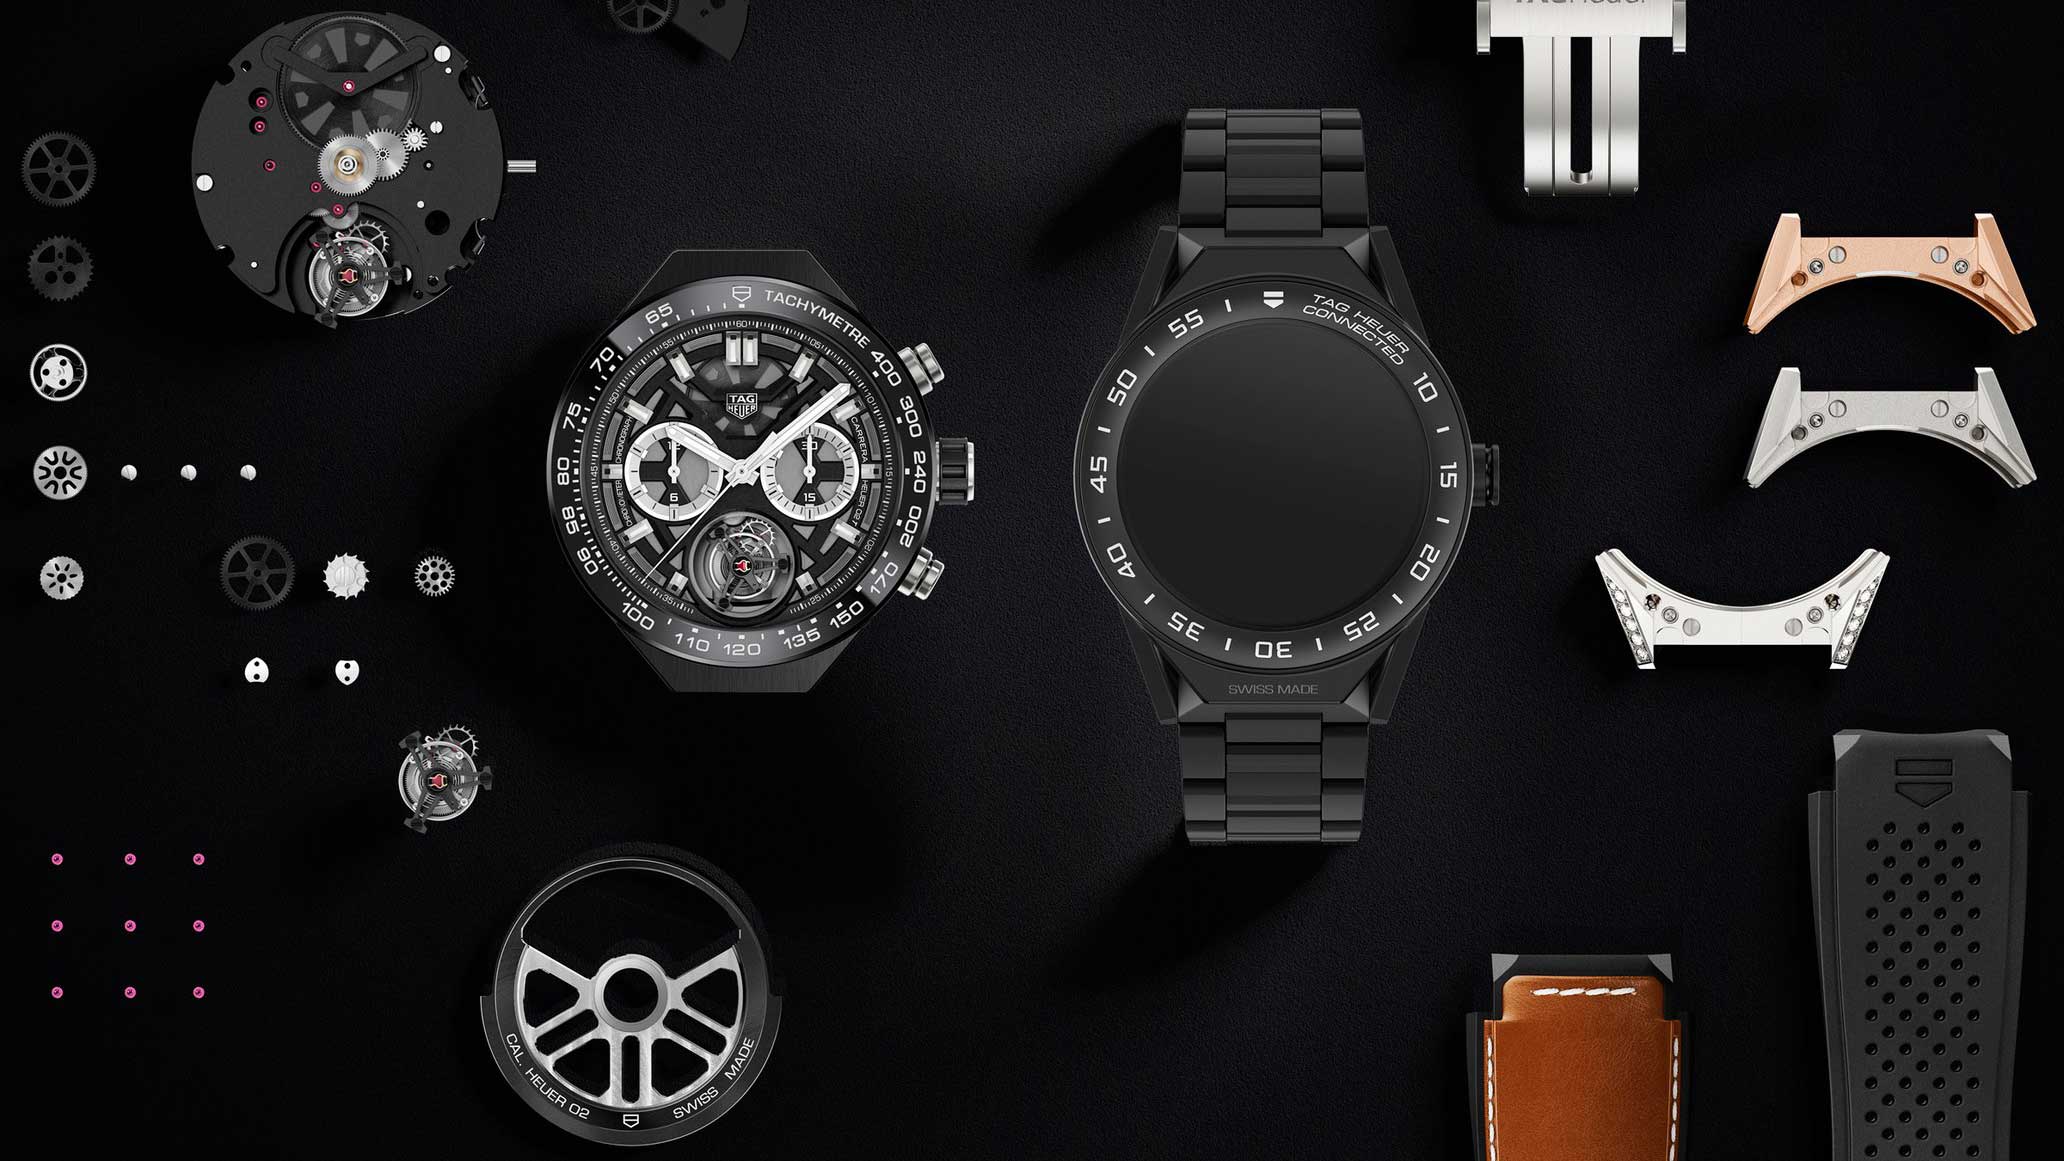 tag heuer modular smartwatch - tag heuer android smartwatch